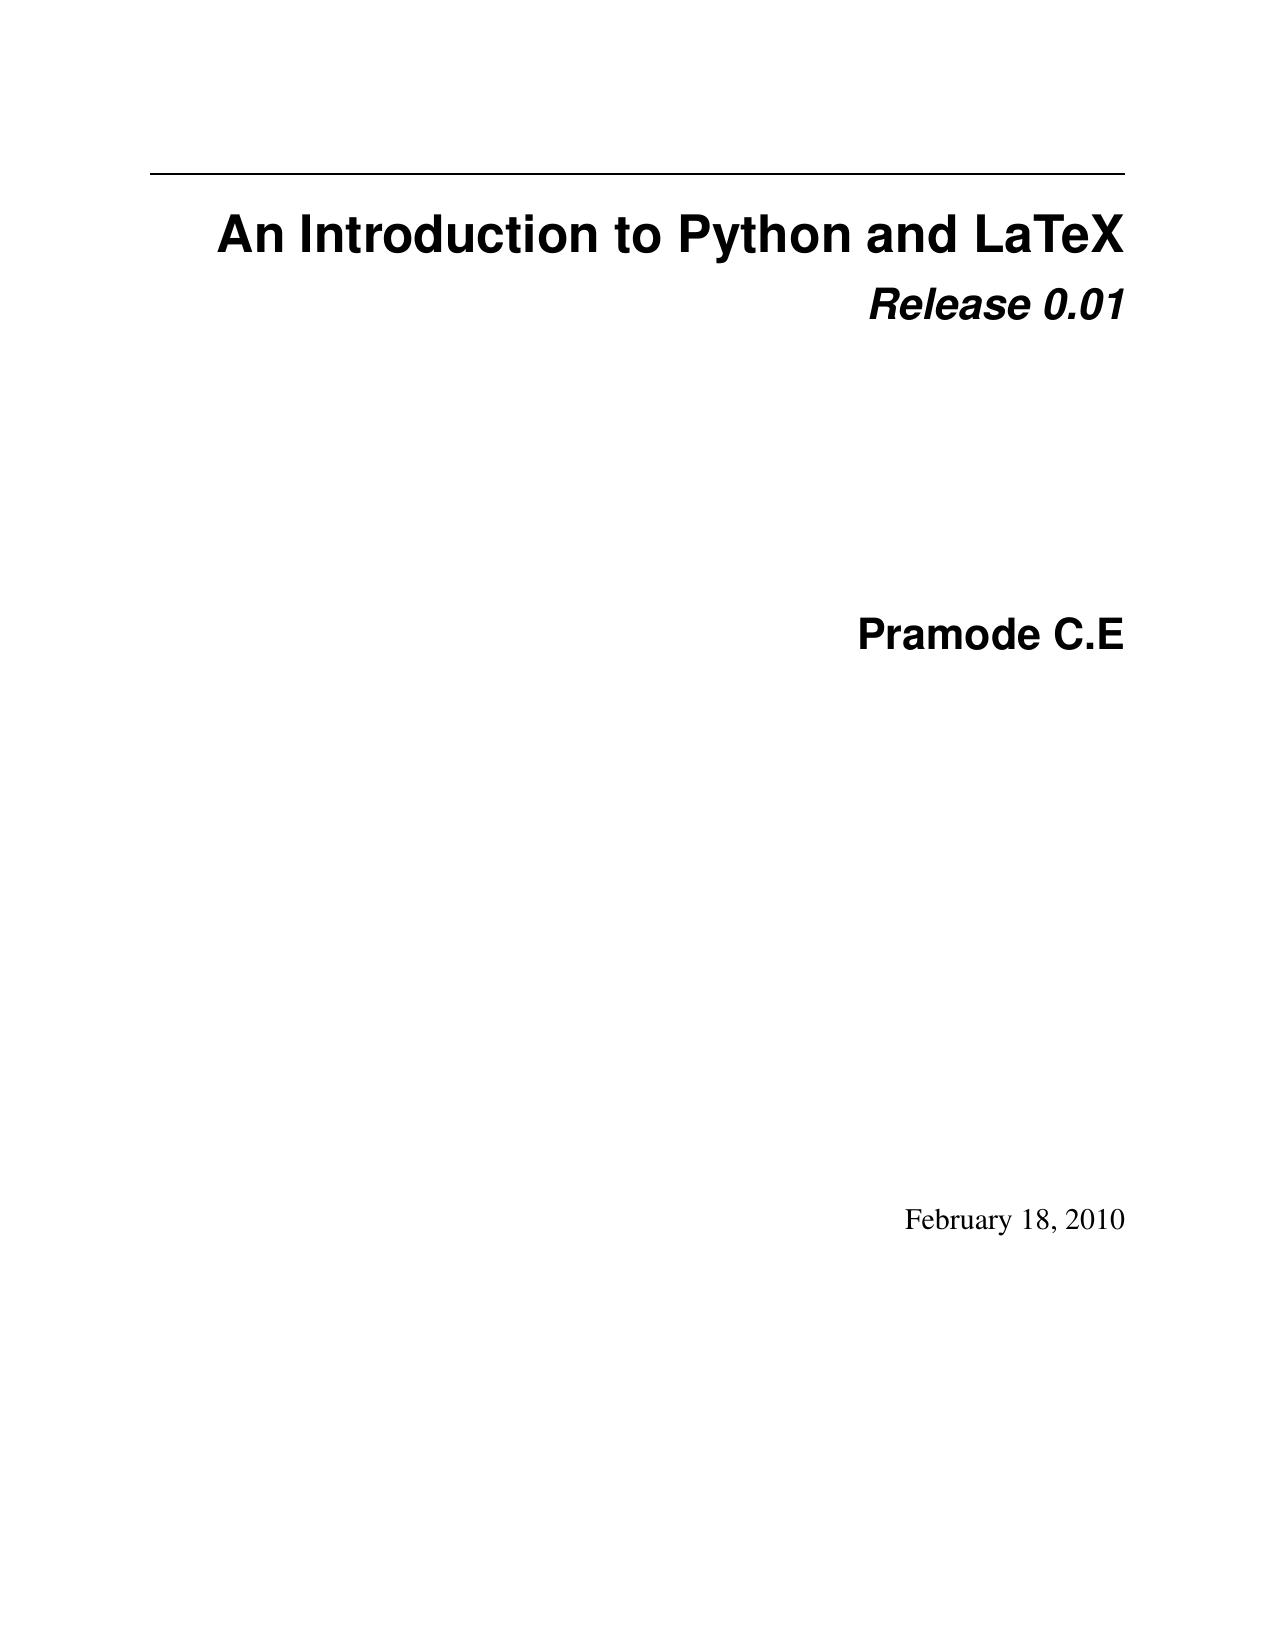 An Introduction to Python and LaTeX Draft 2010